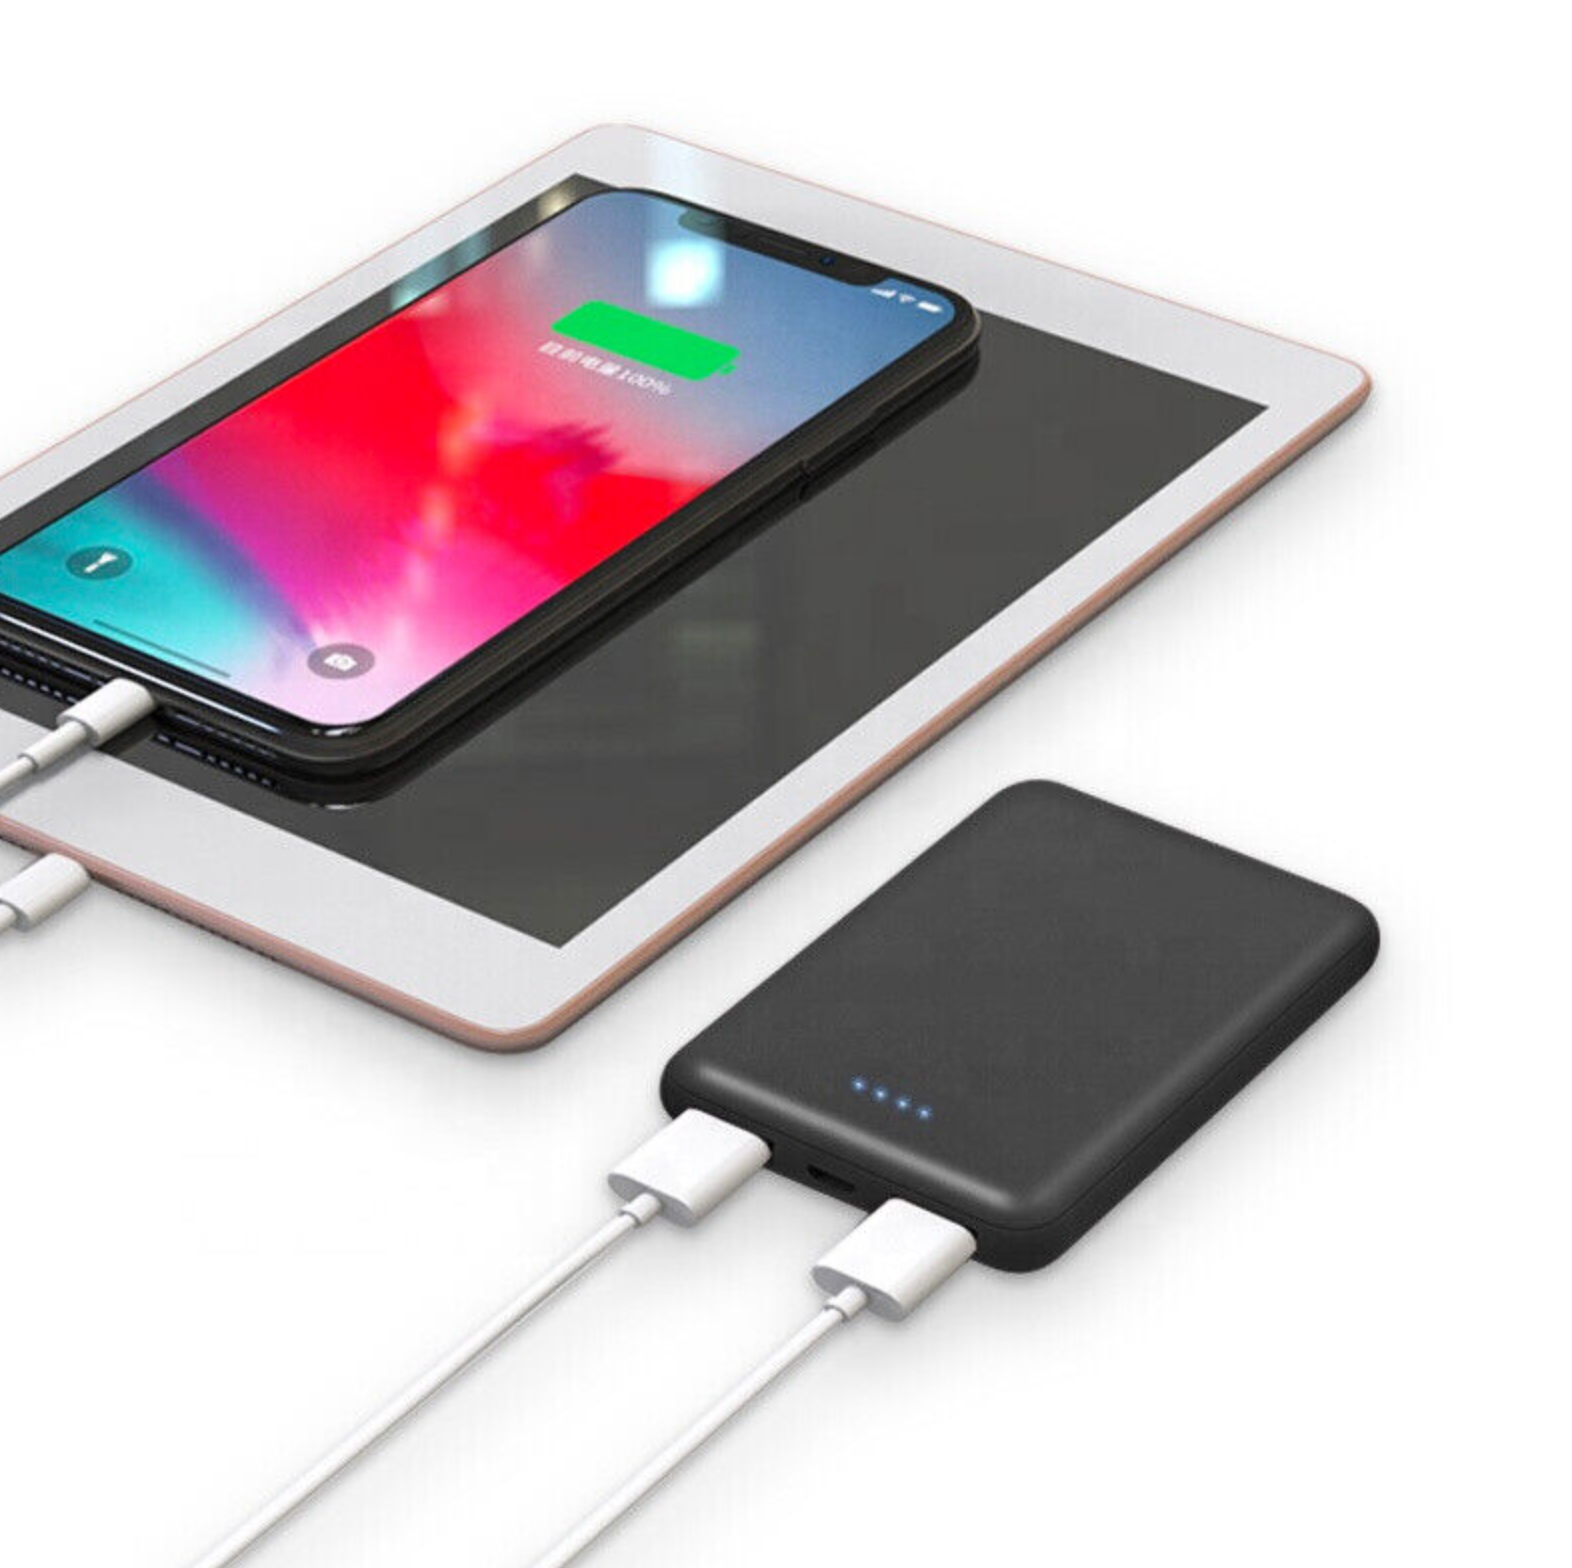 Portable Battery Pack